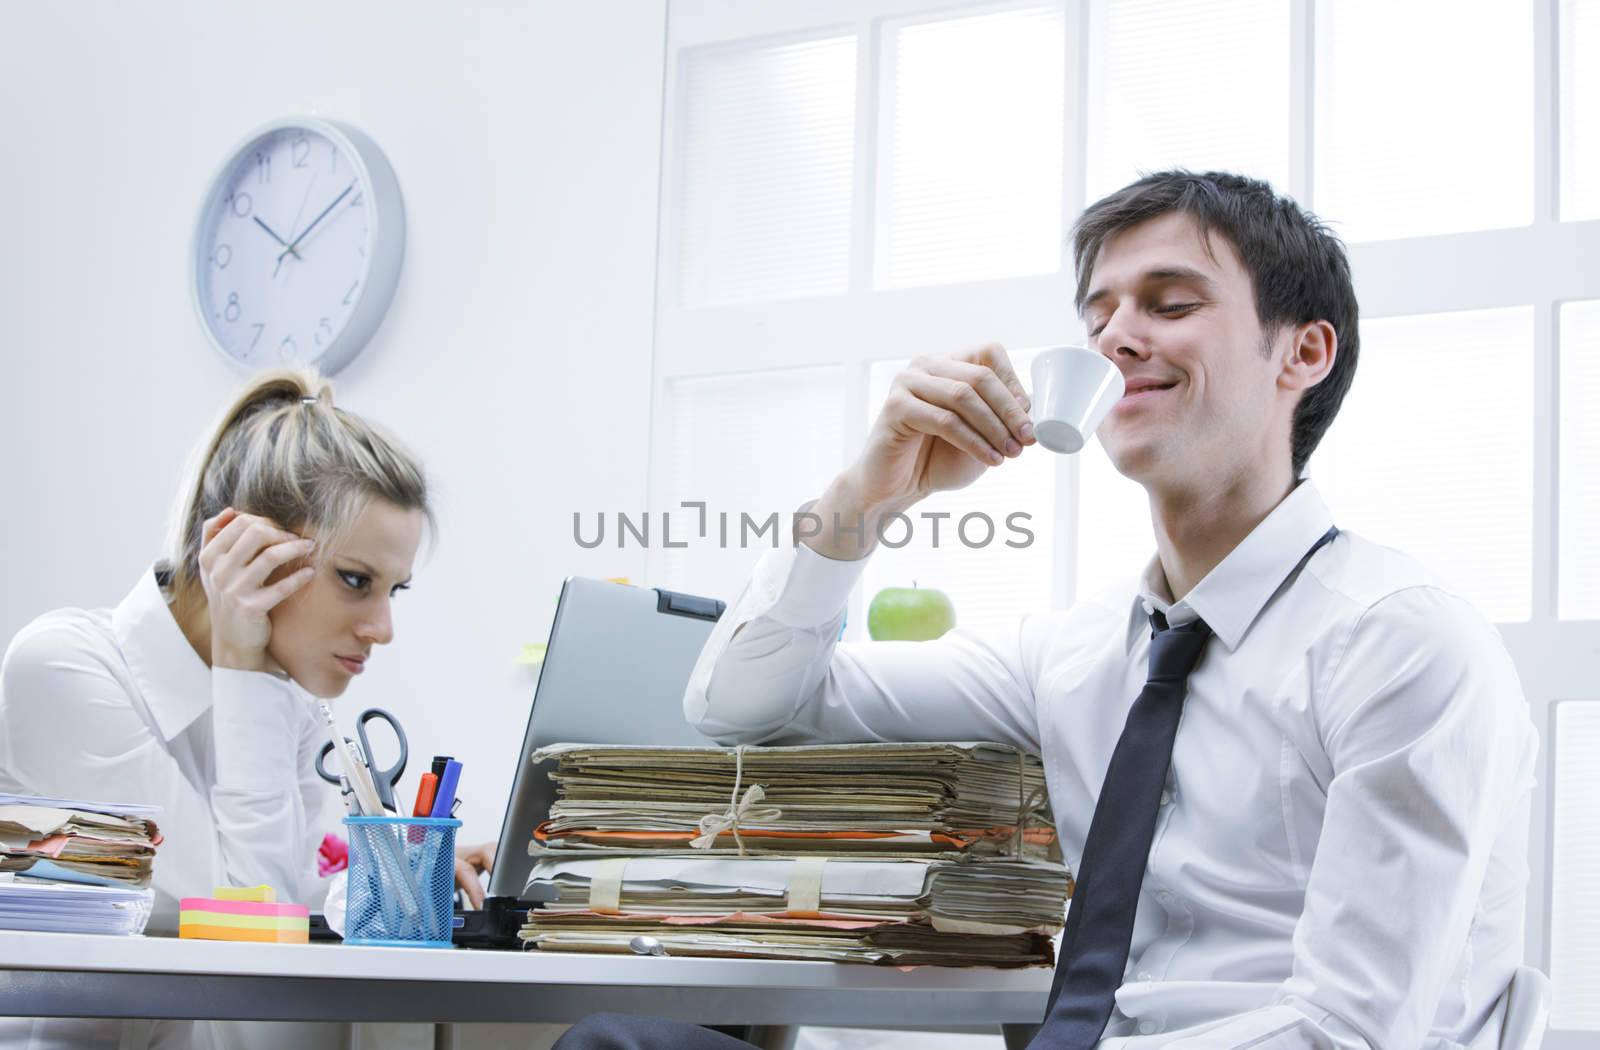 Business man enjoys a hot cup of coffee in the office, annoyed female colleague in the background